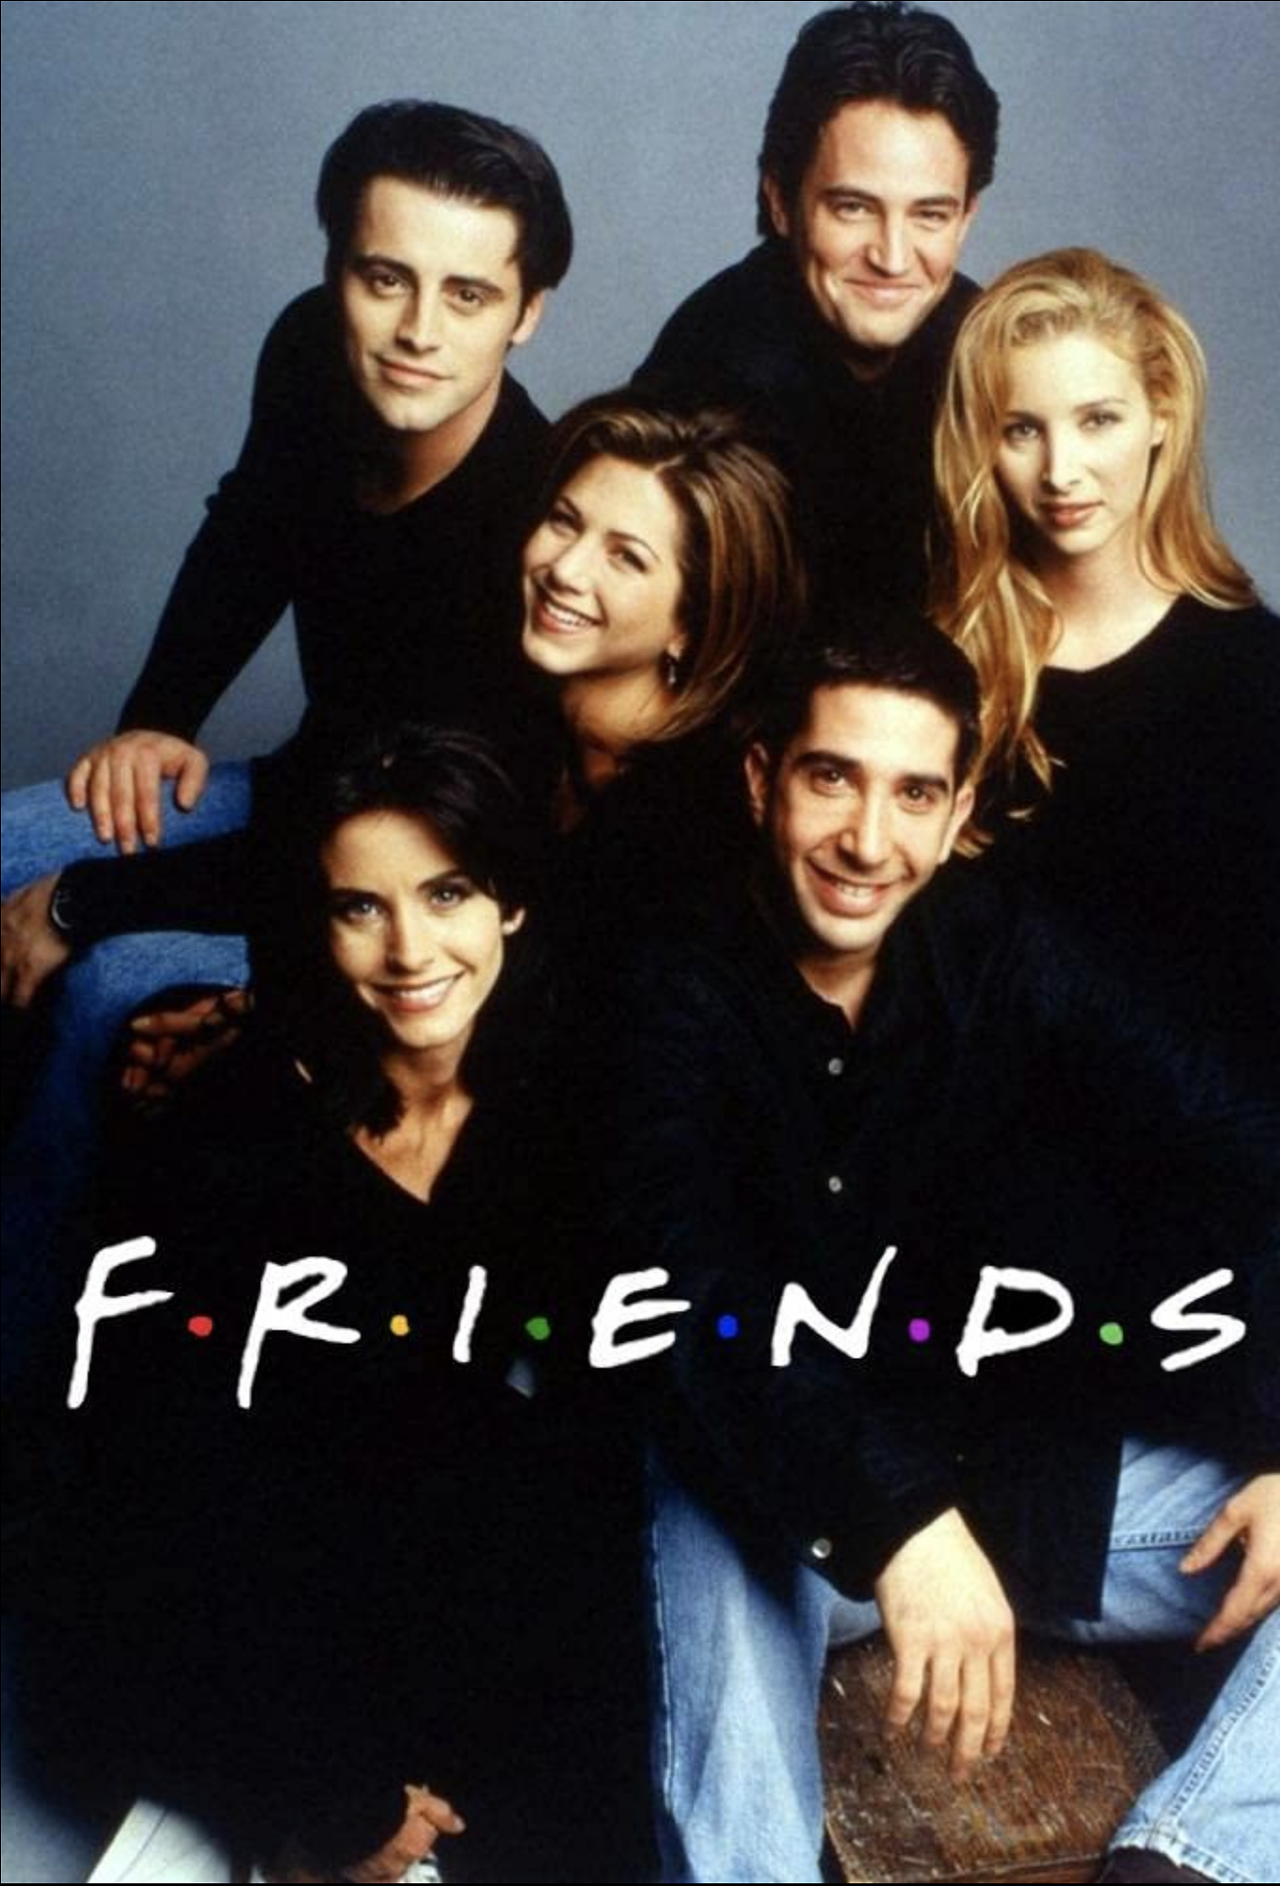 Friends debuted on NBC (1994)